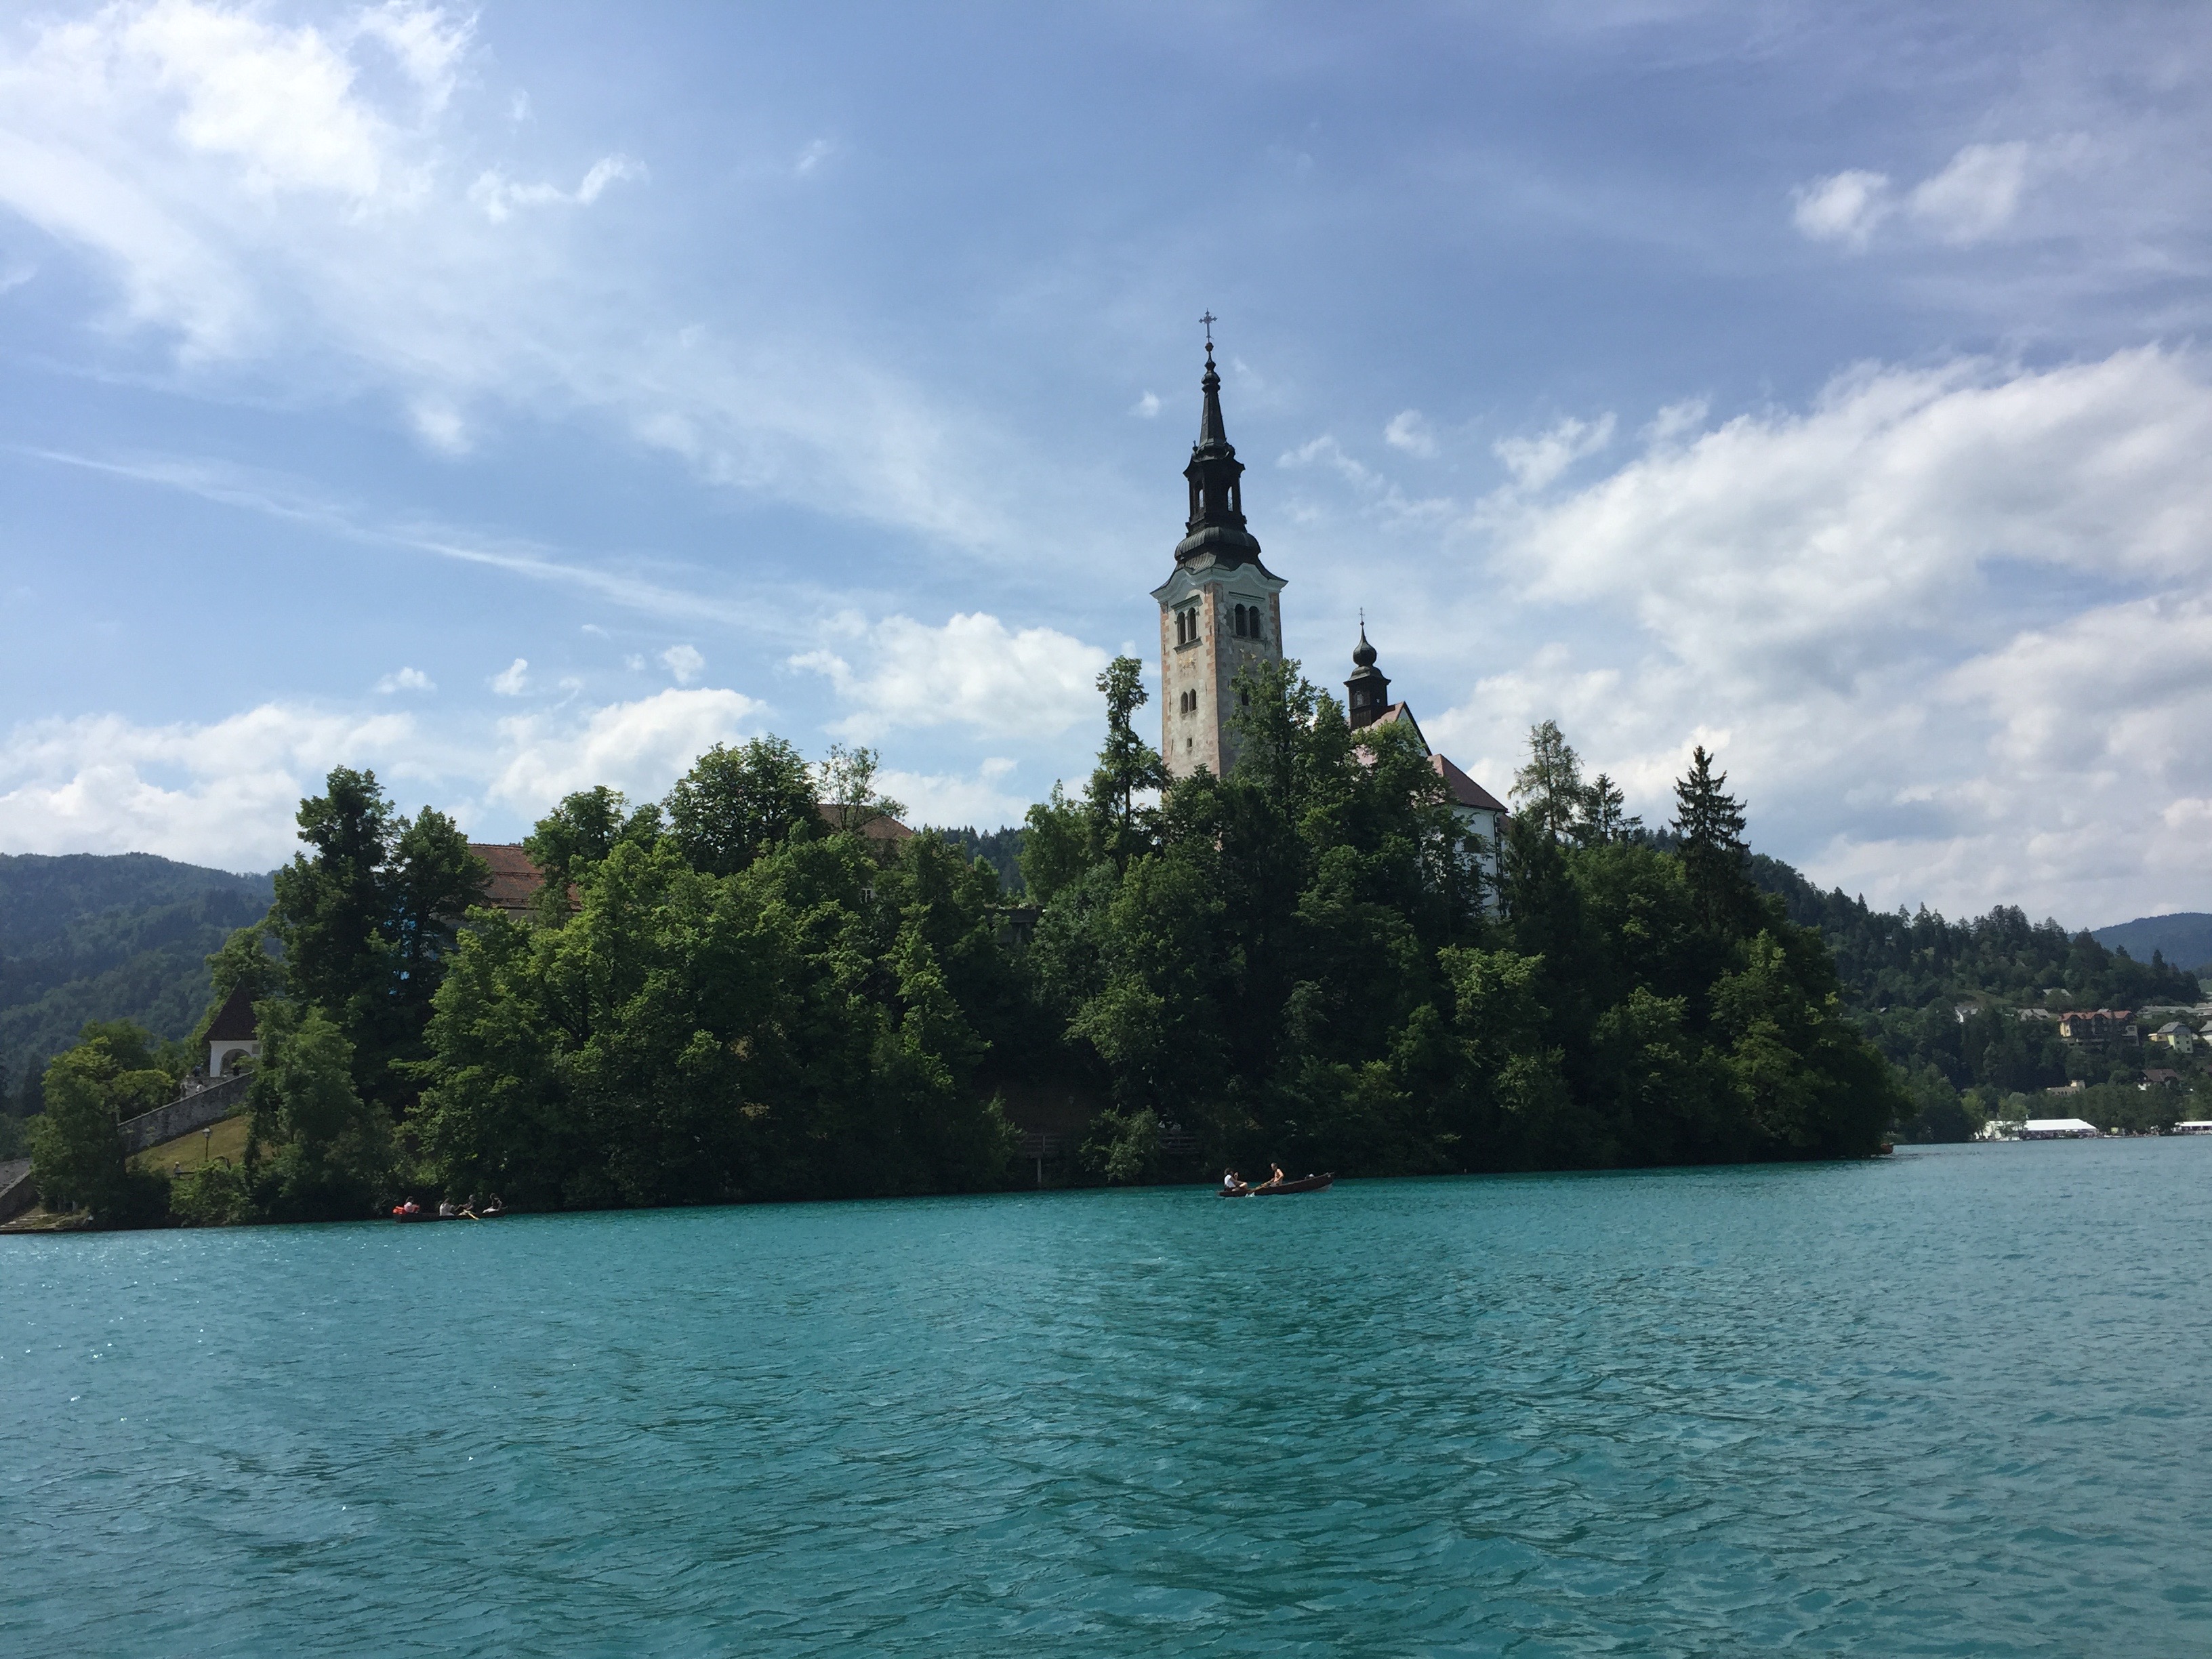 Lake Bled Klooster